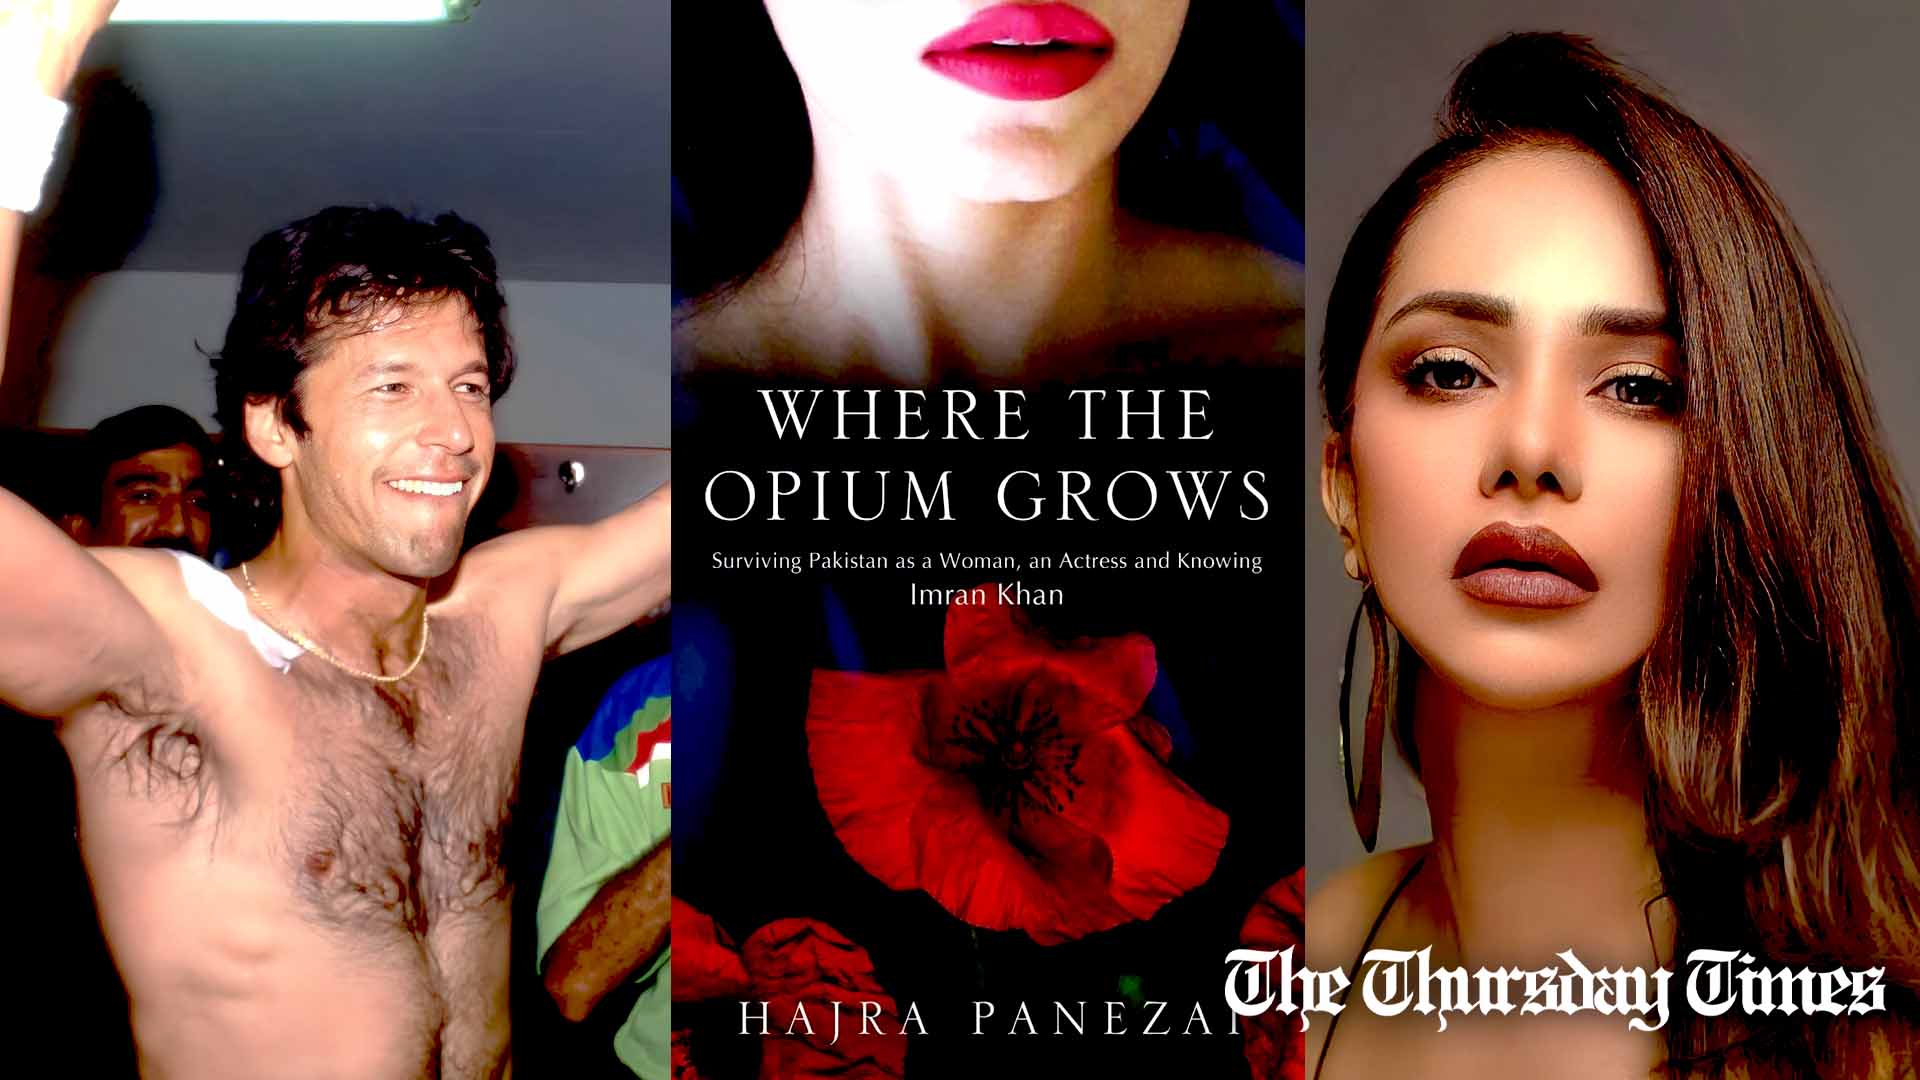 A combined file photo is shown of PTI chairman and former cricketer Imran Khan in 1992 (L), Hajra Khan's book, the cover of Where the Opium Grows (C) and actress Hajra Khan, also known as Hajra Panezai (R). — FILE/THE THURSDAY TIMES